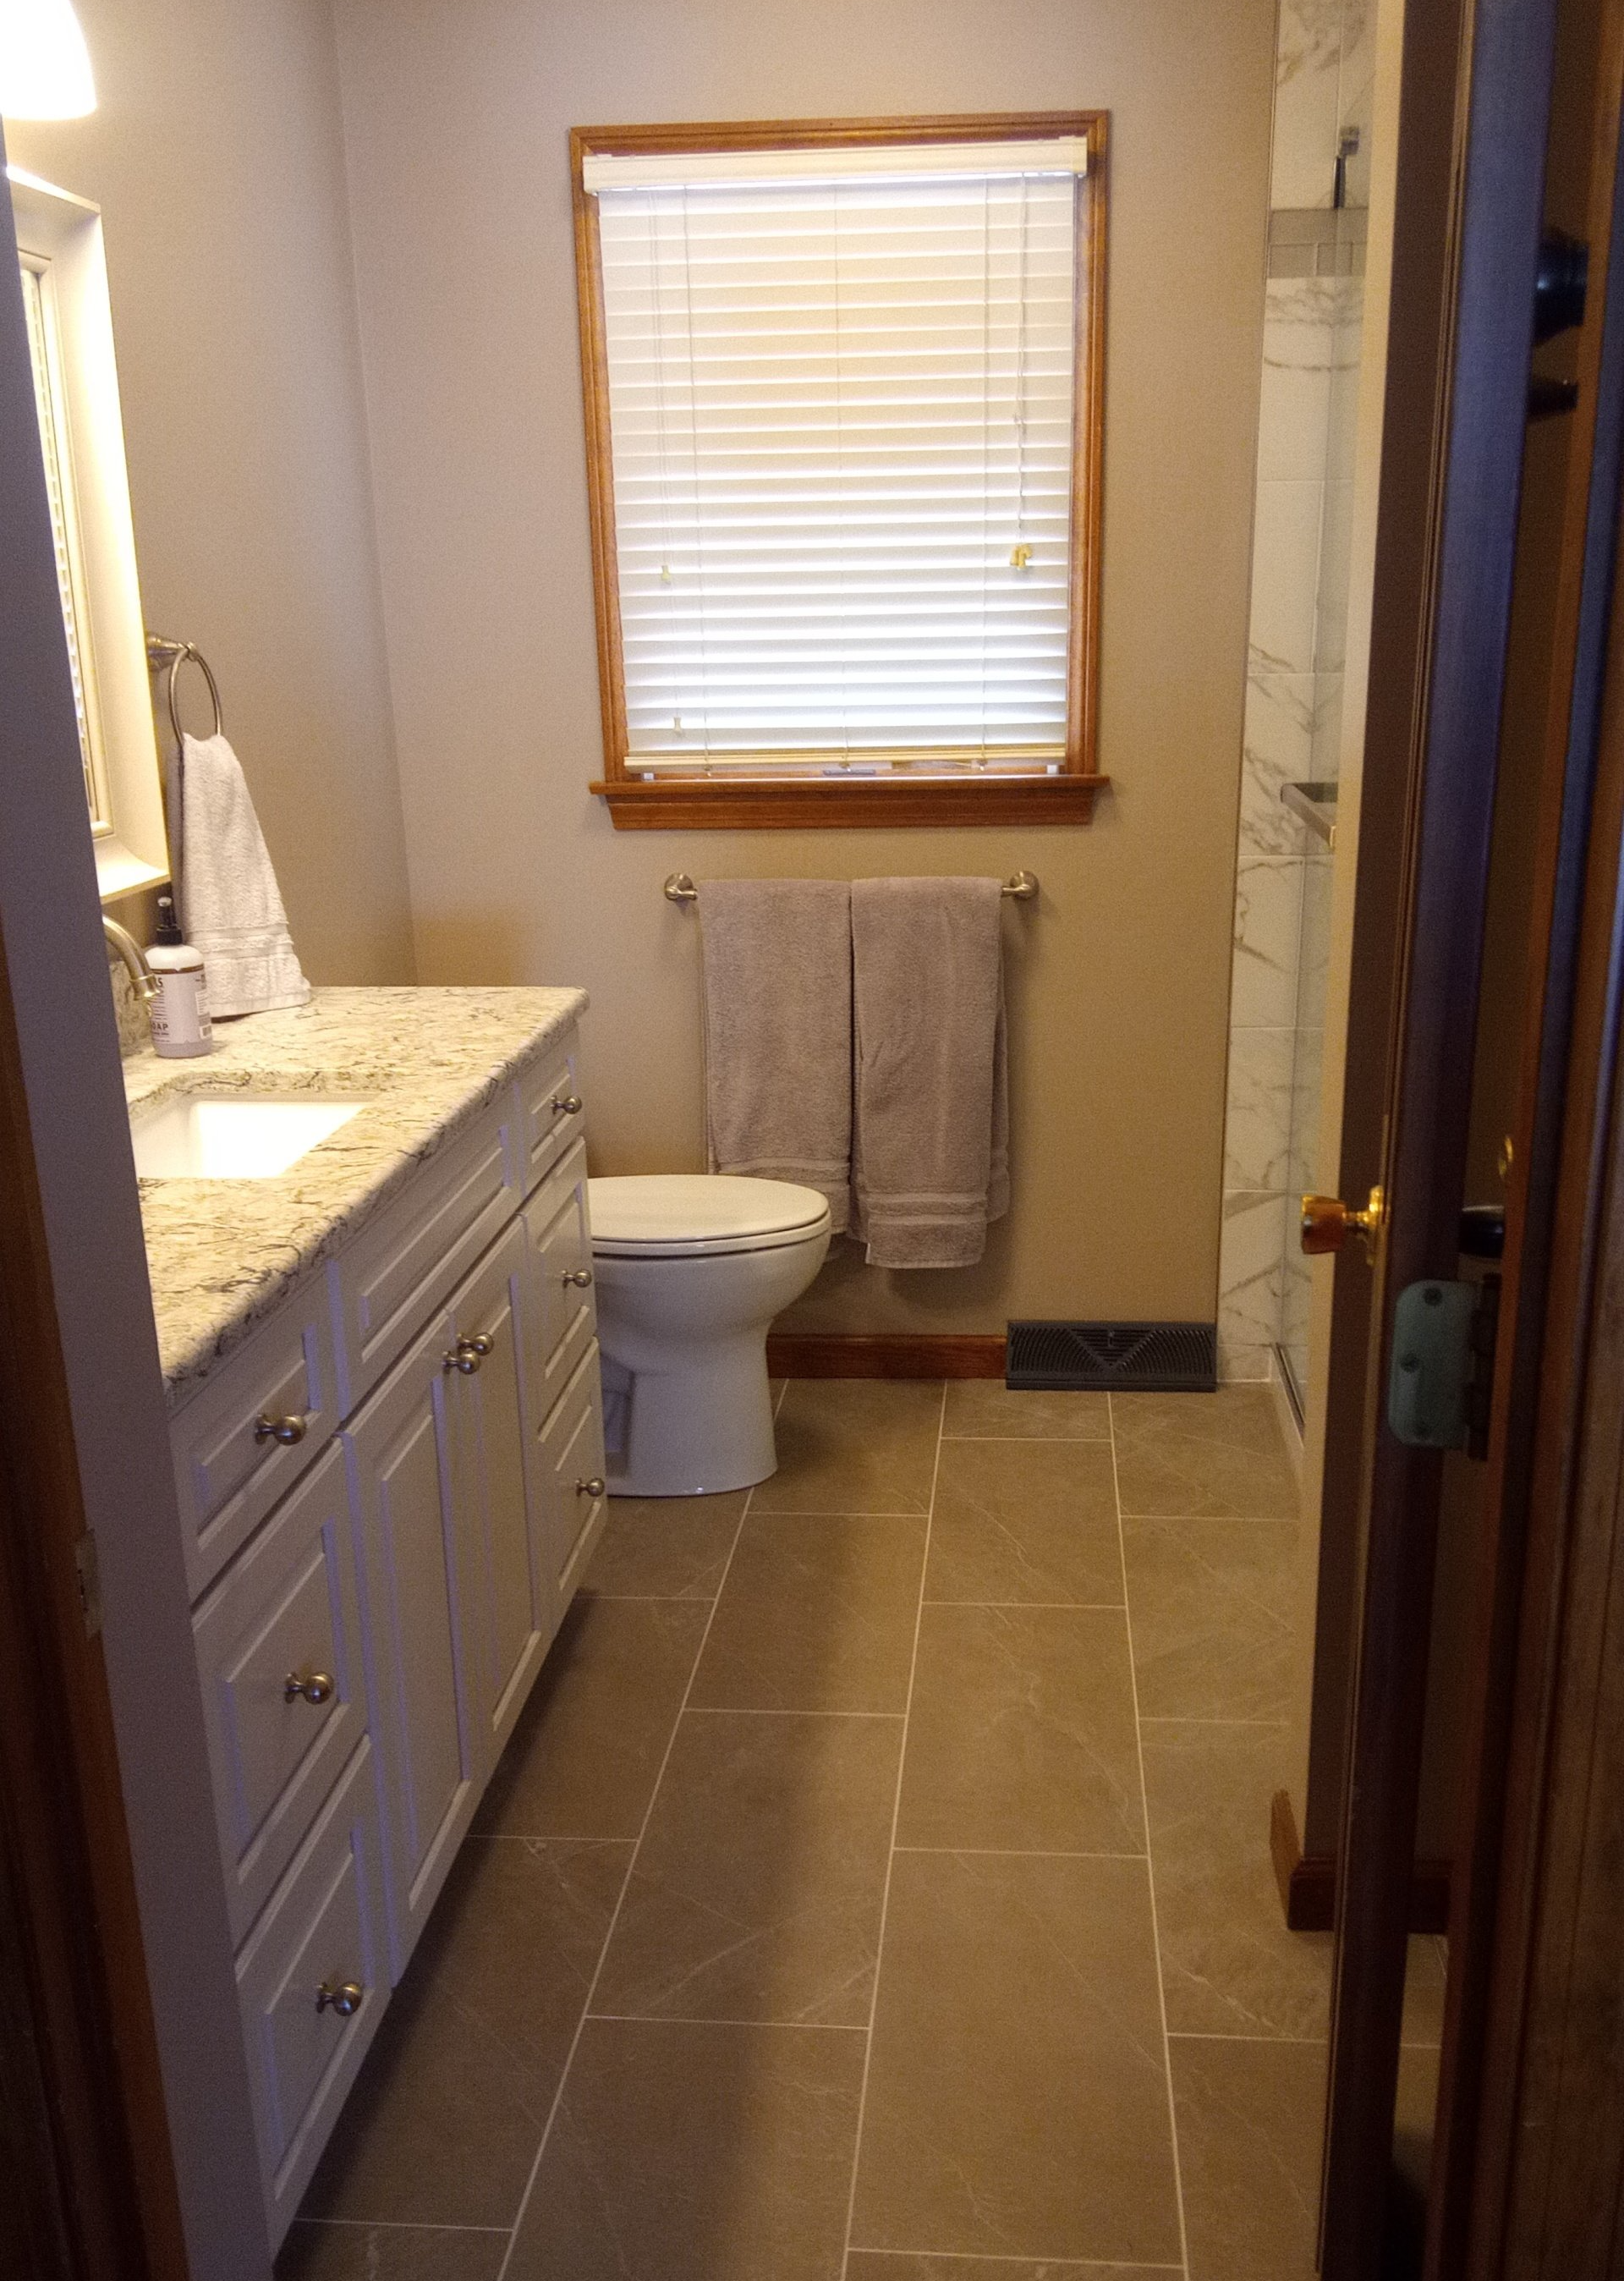 Photo of completed bathroom remodel with tile flooring